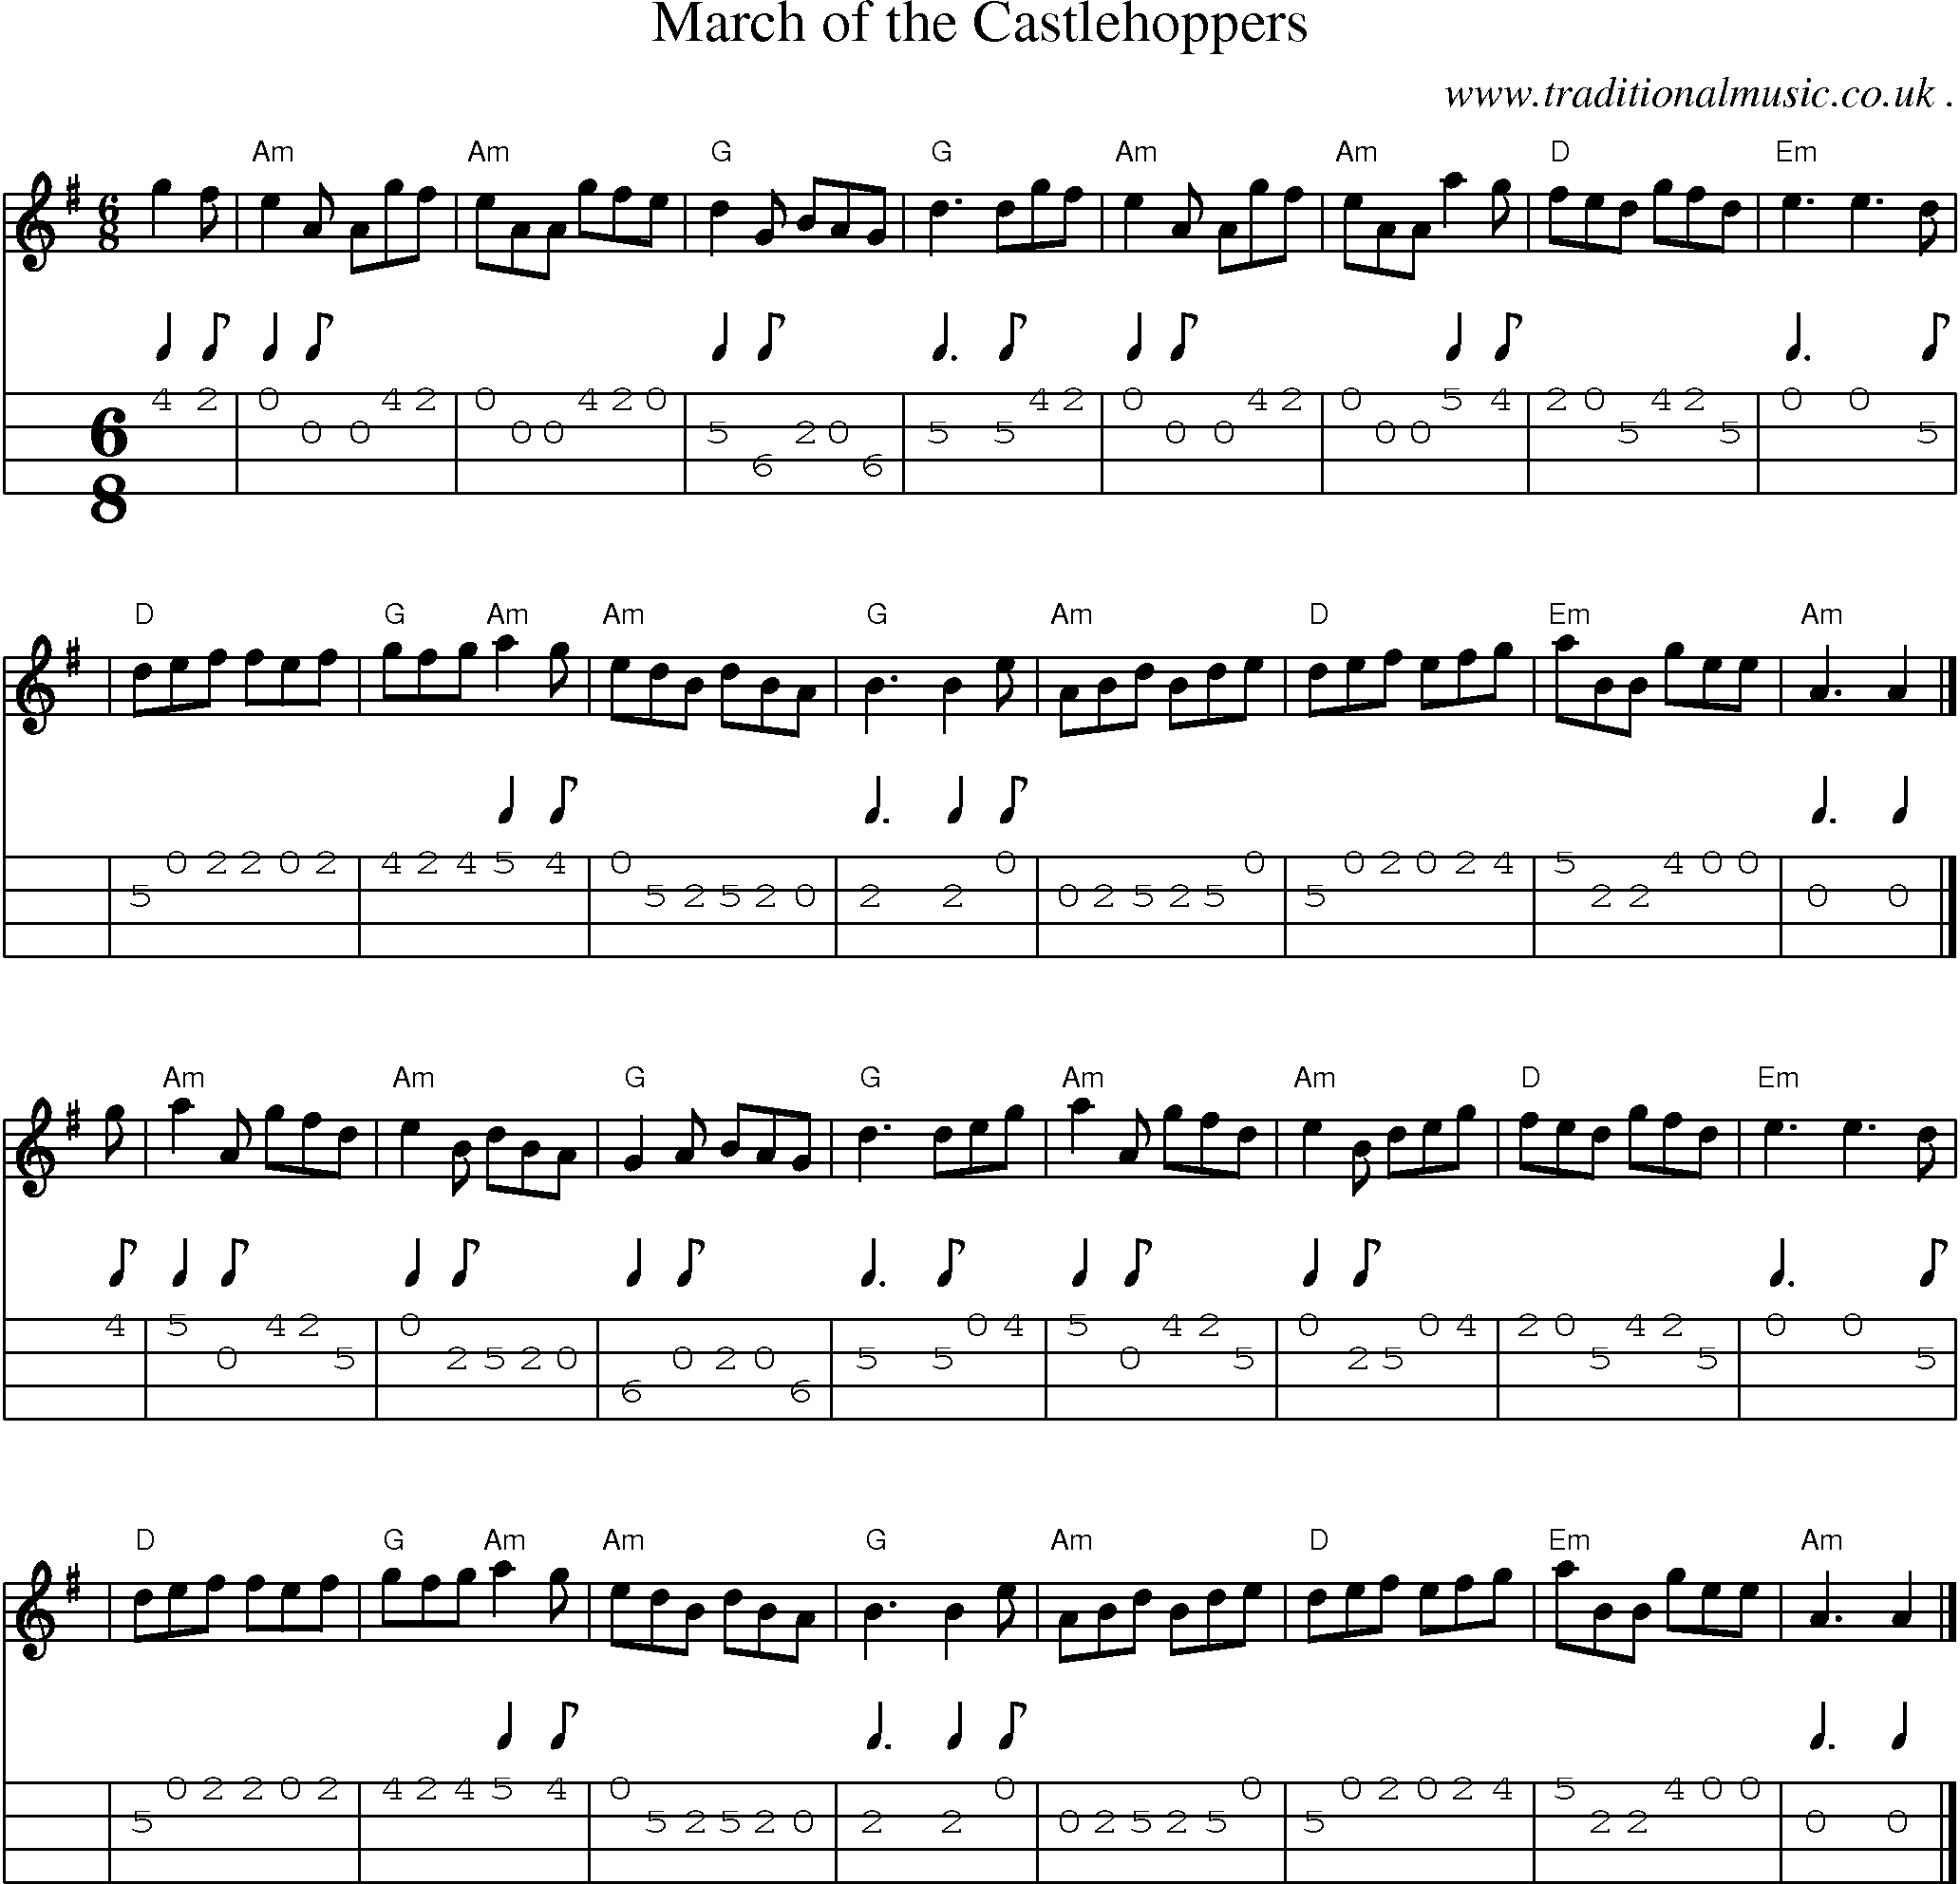 Sheet-music  score, Chords and Mandolin Tabs for March Of The Castlehoppers